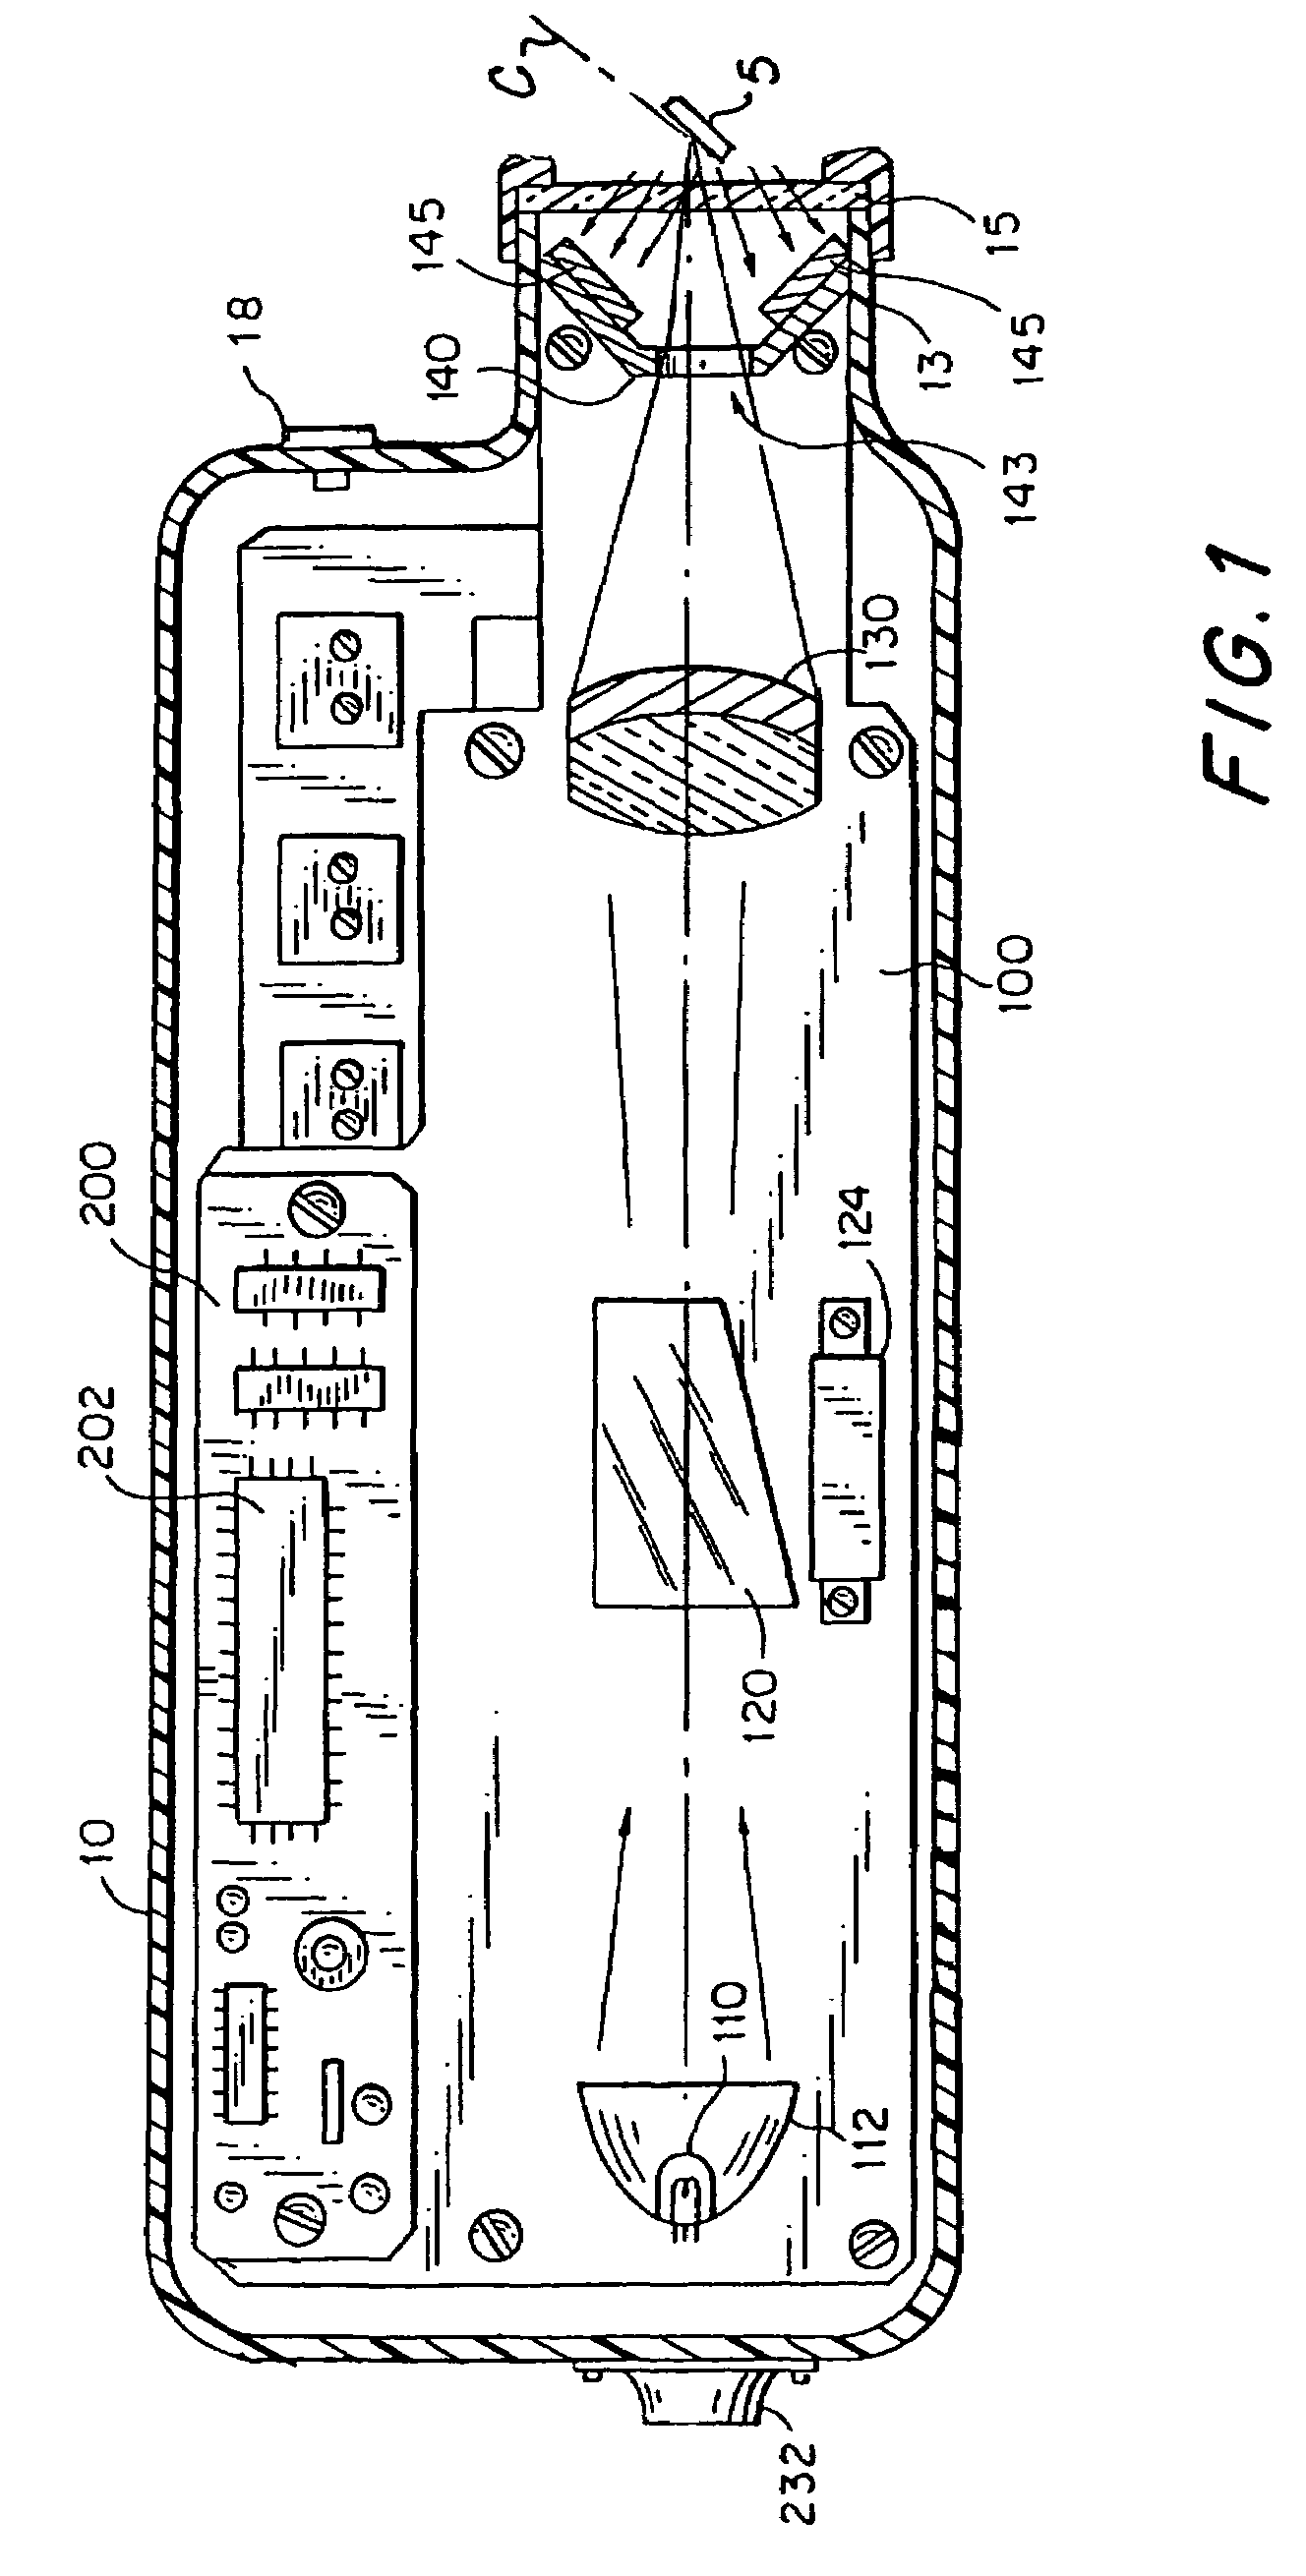 Substance detection and alarm using a spectrometer built into a steering wheel assembly